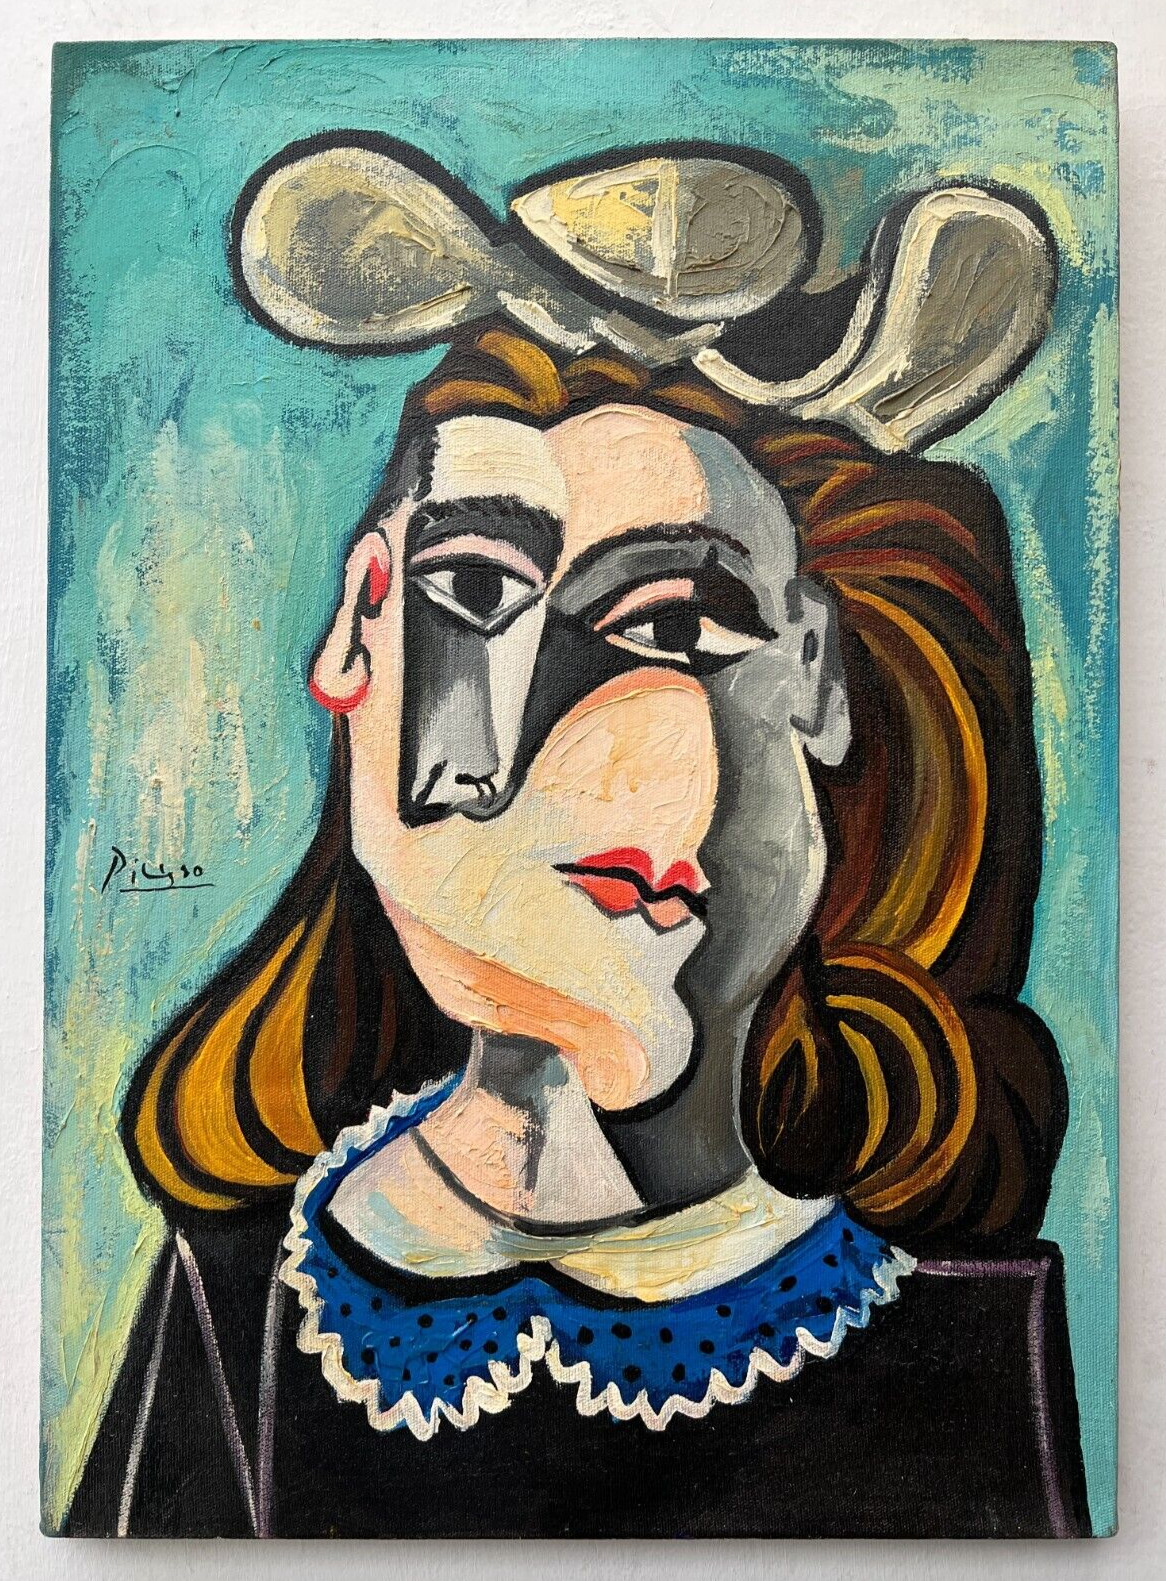 Pablo Picasso (Handmade) Oil Painting on canvas signed & stamped